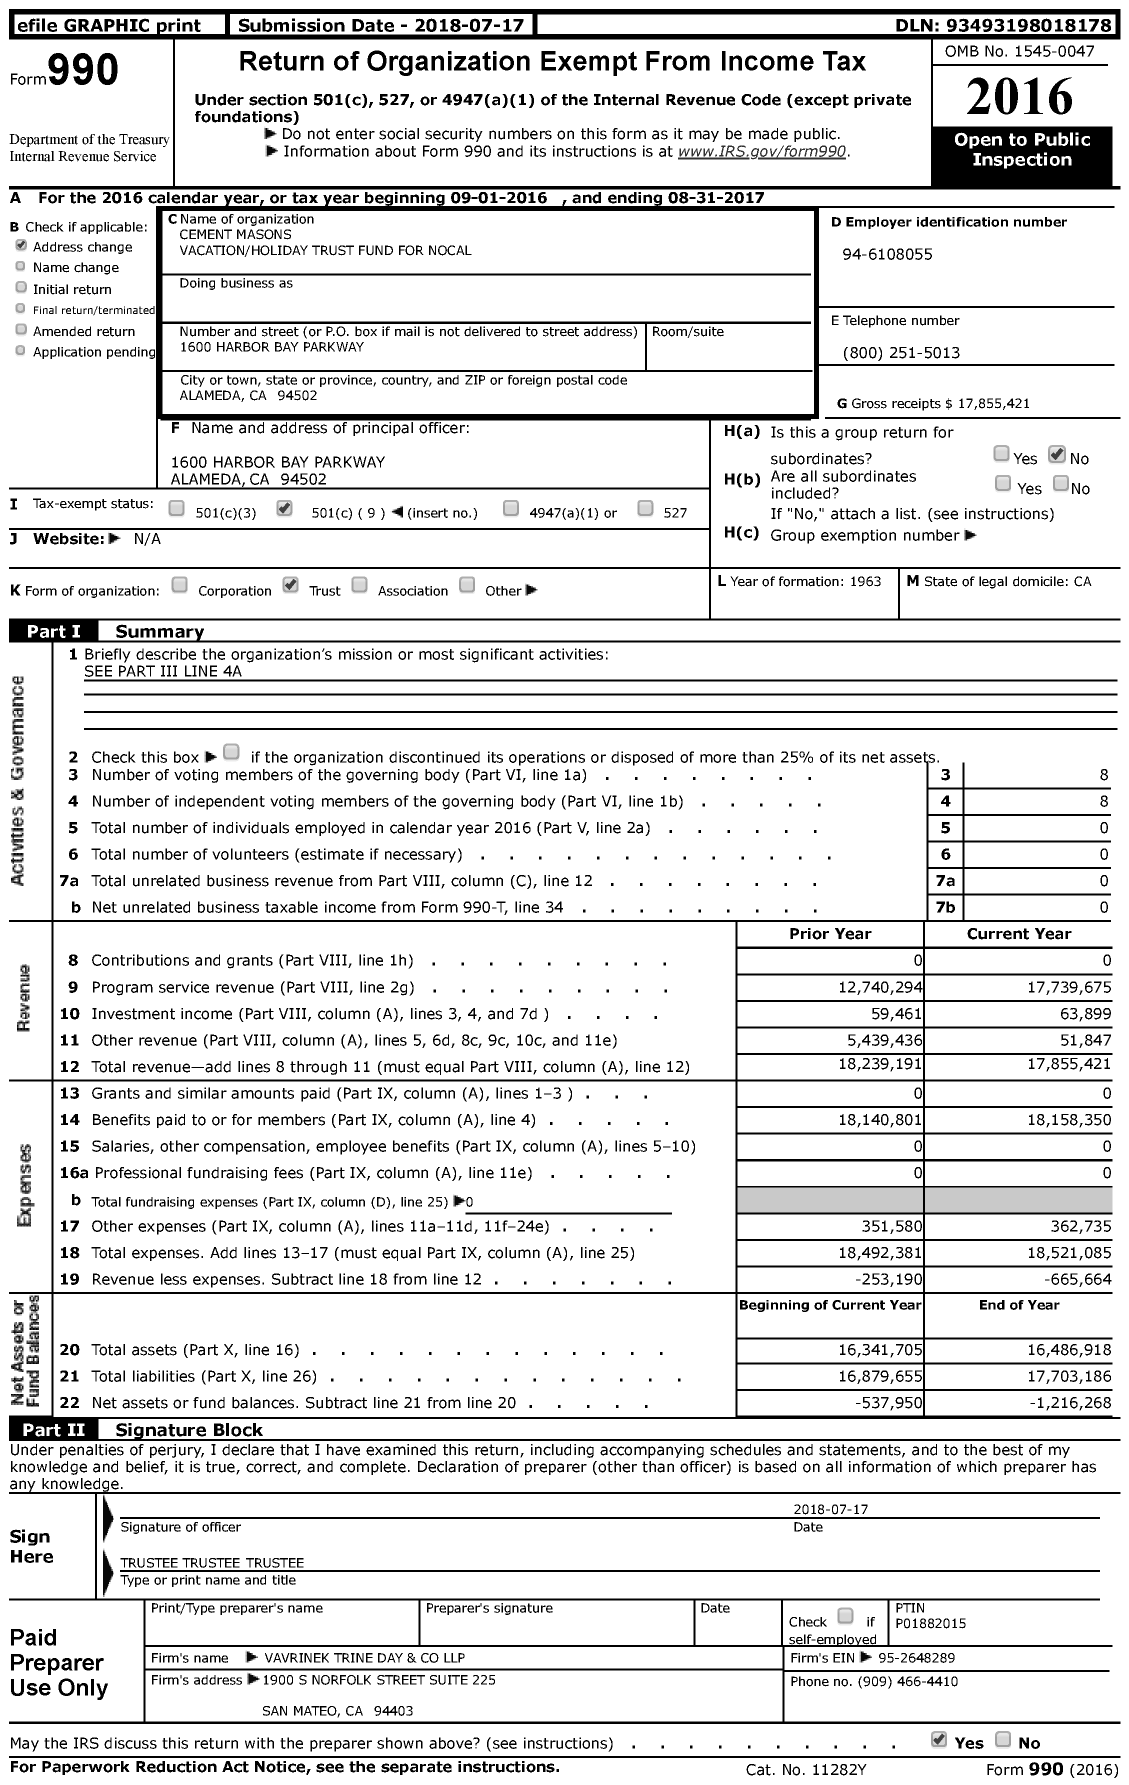 Image of first page of 2016 Form 990 for Cement Masons Vacation Trust Fund for Northern California